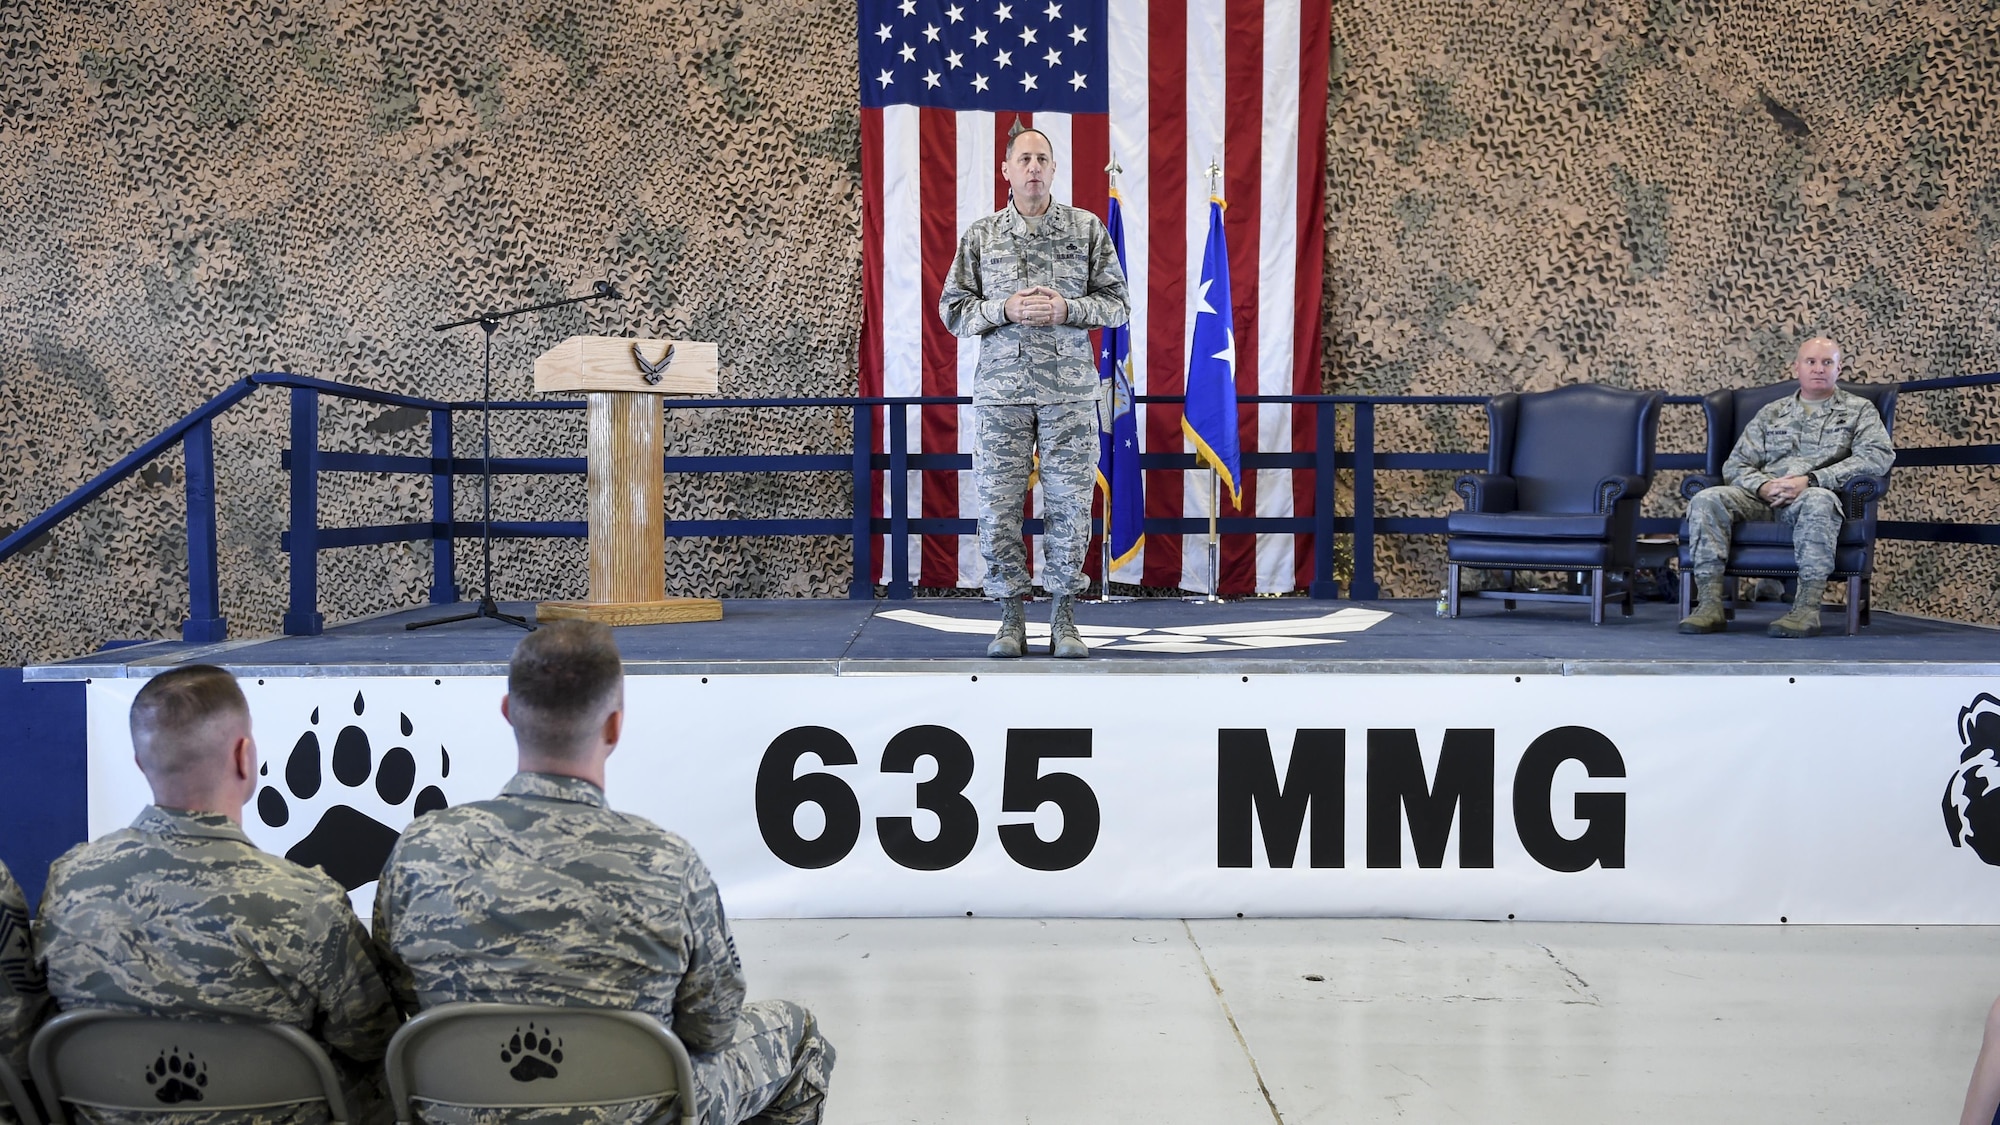 Lt. Gen Lee Levy, commander Air Combat Command officiated the 49th Materiel Maintenance Group transition to the 635th MMG re-designation ceremony Oct. 20, 2016 at Holloman Air Force Base N.M. The Ceremony marks the historic event of the Materiel Maintenance Group moving from Air Combat Command over to Air Force Material Command. (U.S. Air Force photo by Staff Sgt. Stacy Jonsgaard)